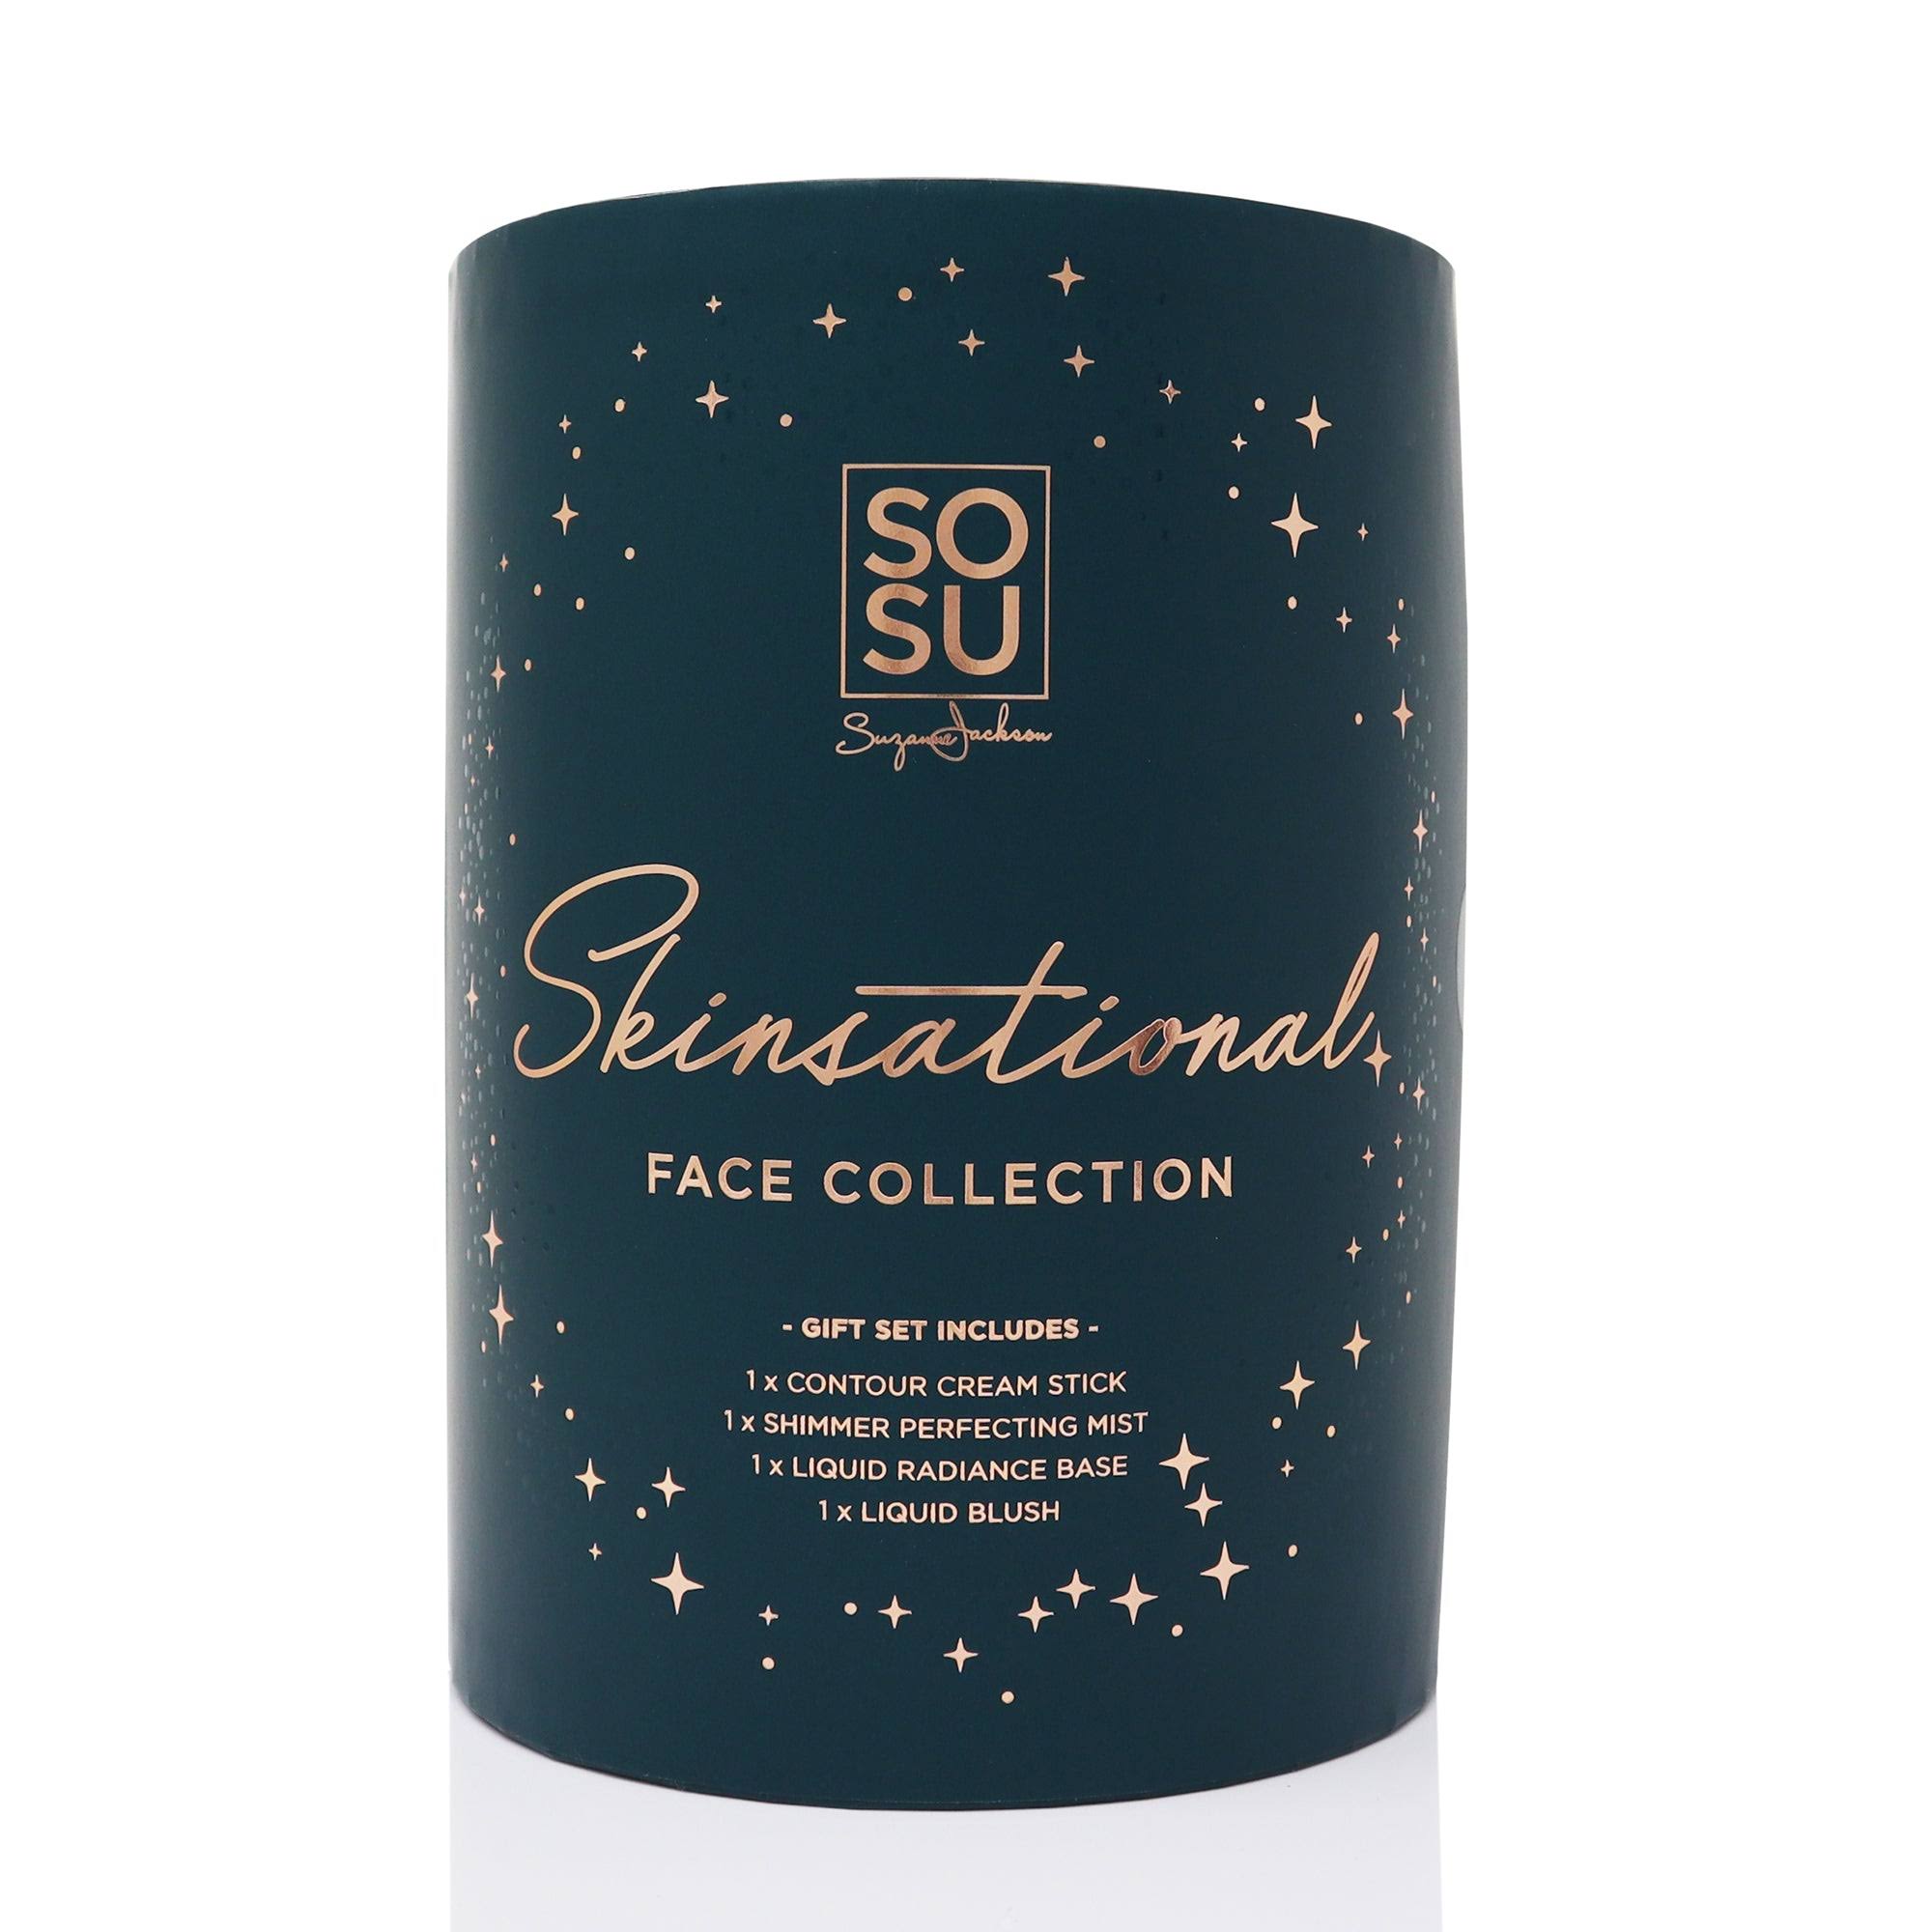 SOSU Skinsational Face Collection